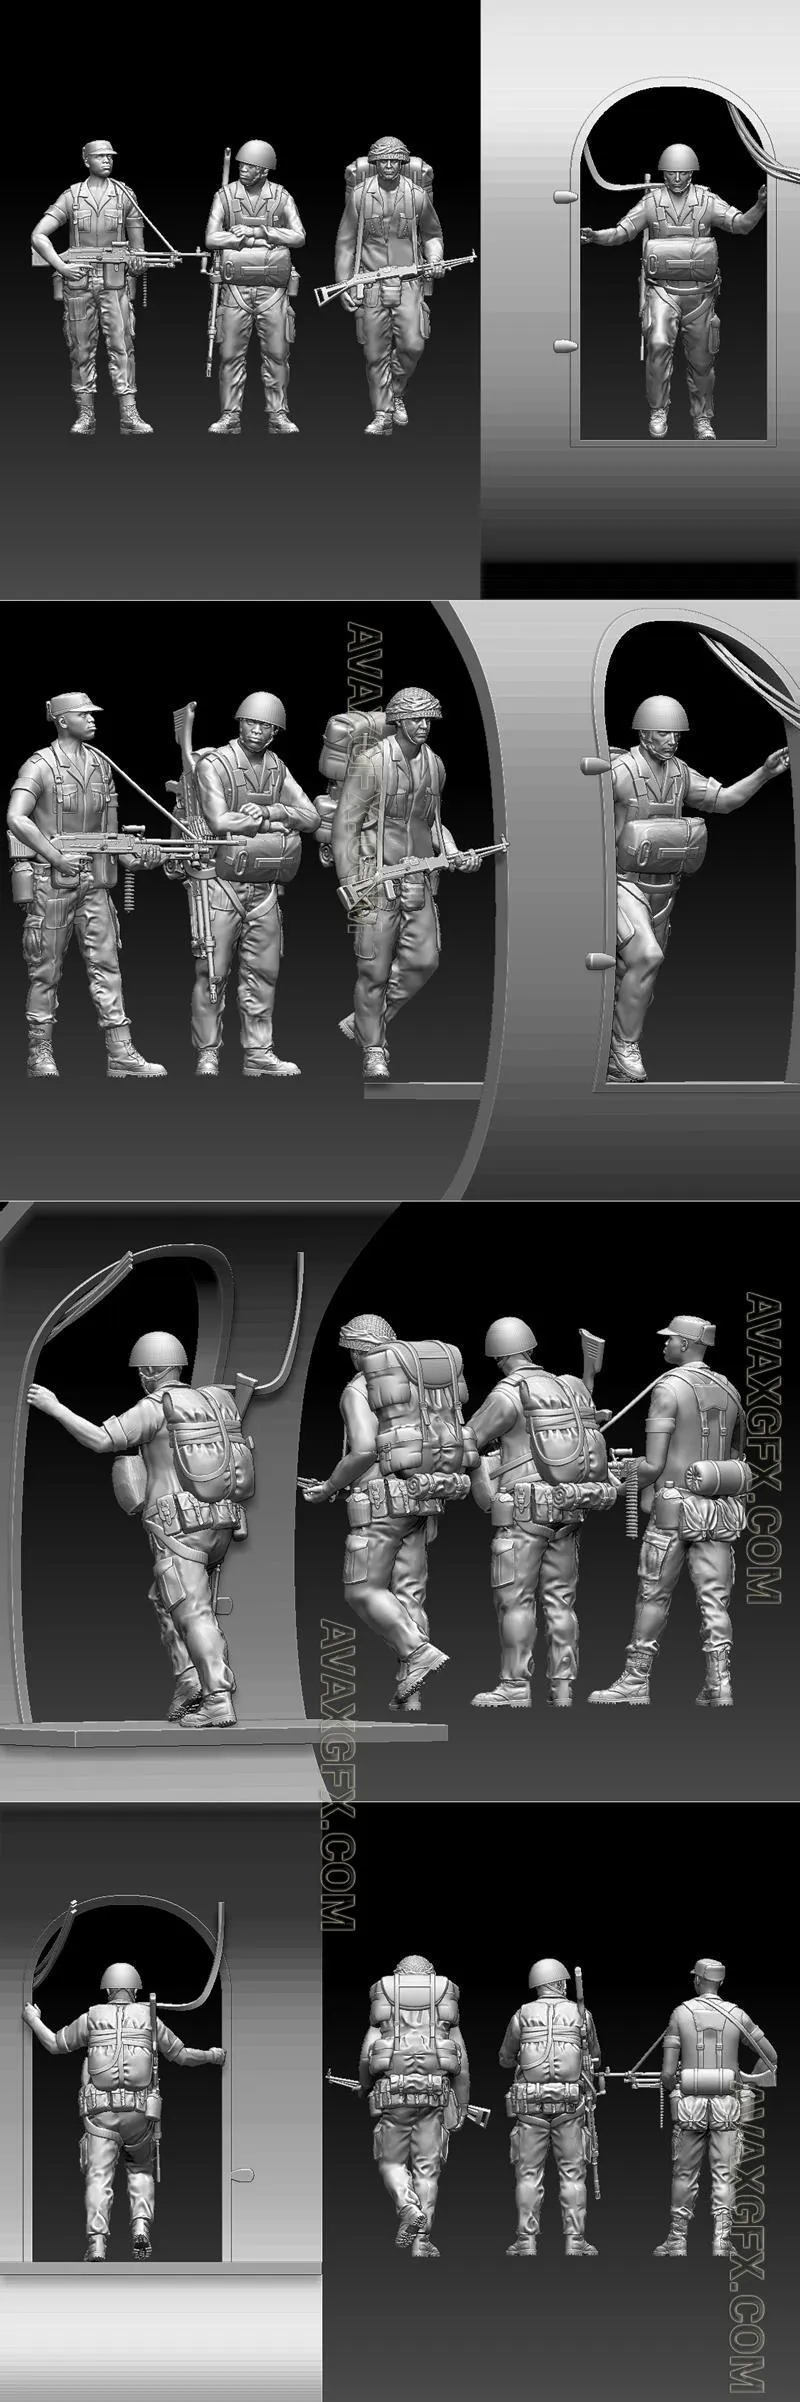 Rodesia Soldiers - STL 3D Model